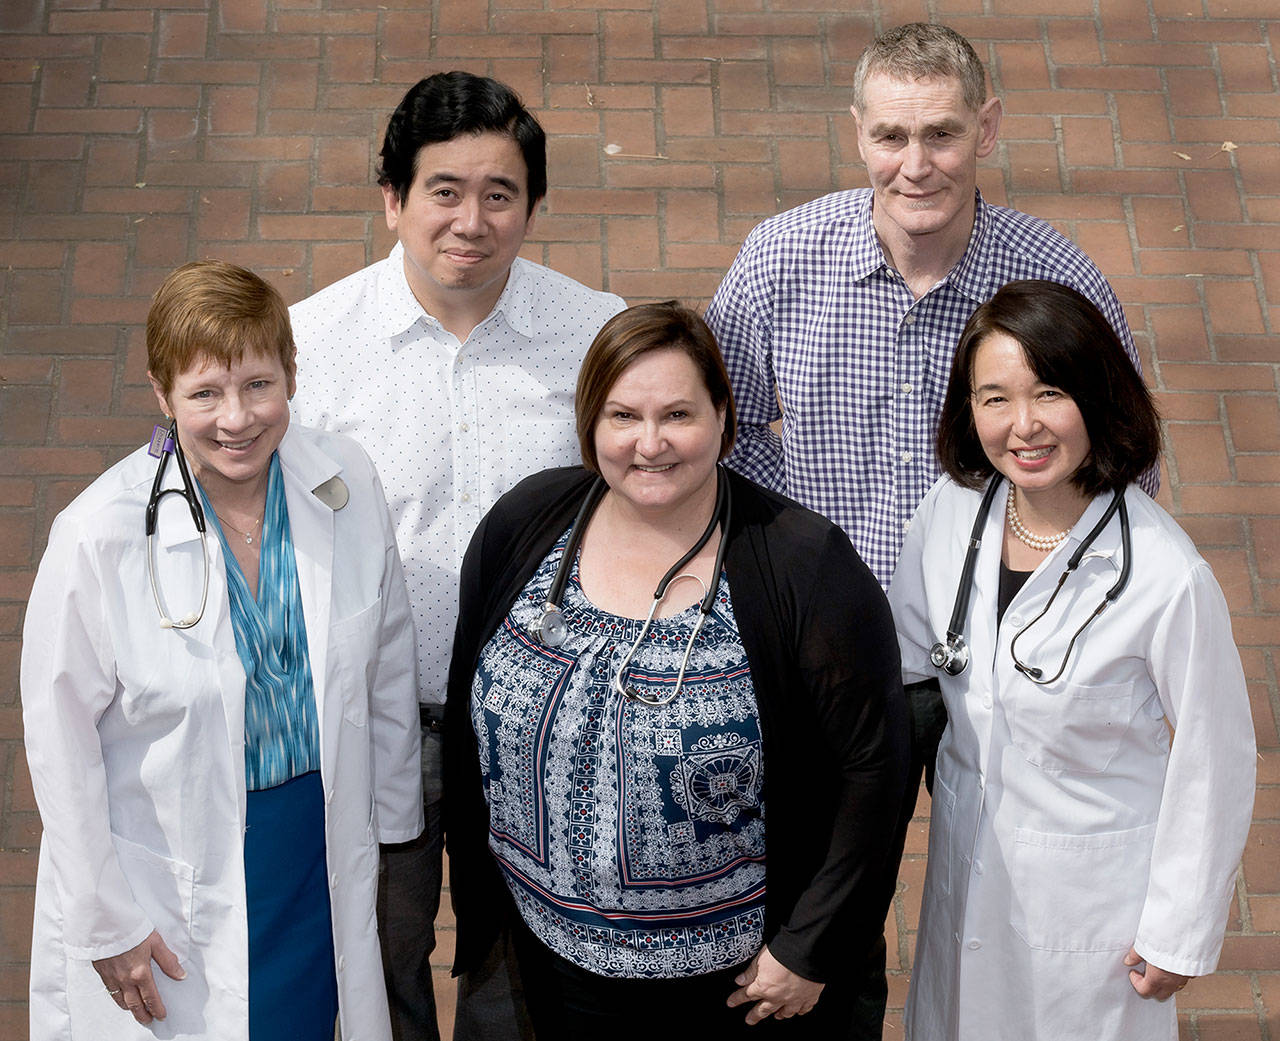 These doctors will participate in a Seattle clinic of the Undiagnosed Diseases Network. From left: Dr. Gail Jarvik, head of medical genetics at the University of Washington School of Medicine; Dr. Sirisak Chanprasert, assistant professor of medicine at UW; Dr. Katrina Dipple, head of genetic medicine at the UW Medicine Department of Pediatrics; Dr. Ian Glass, professor of pediatrics at UW, who practices at Seattle Children’s Hospital; and Dr. Fuki Hisama, professor of medicine at UW. (UW Medicine)